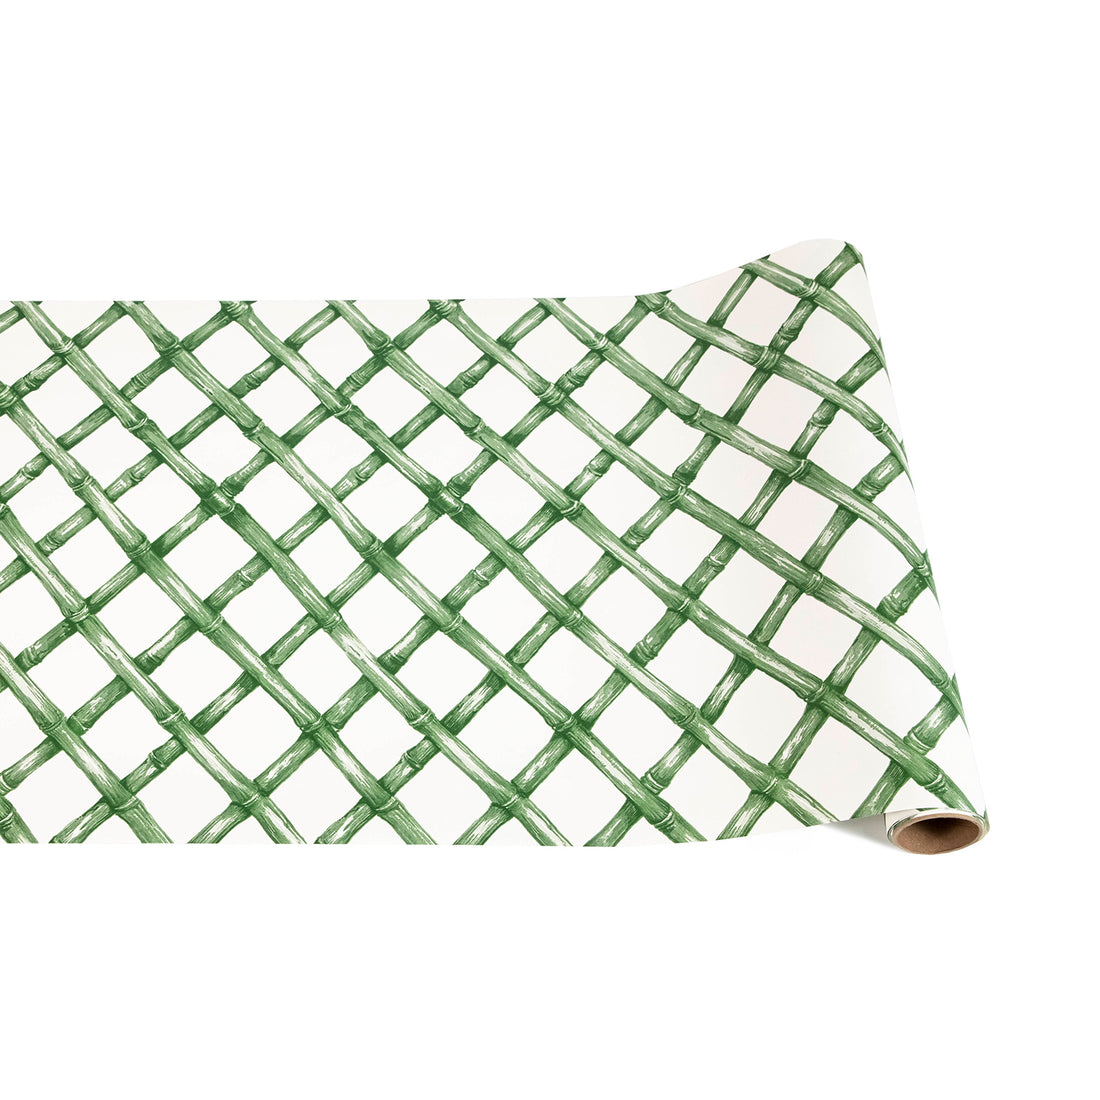 Paper roll featuring a diagonal woven bamboo pattern in monochrome green on a white background.